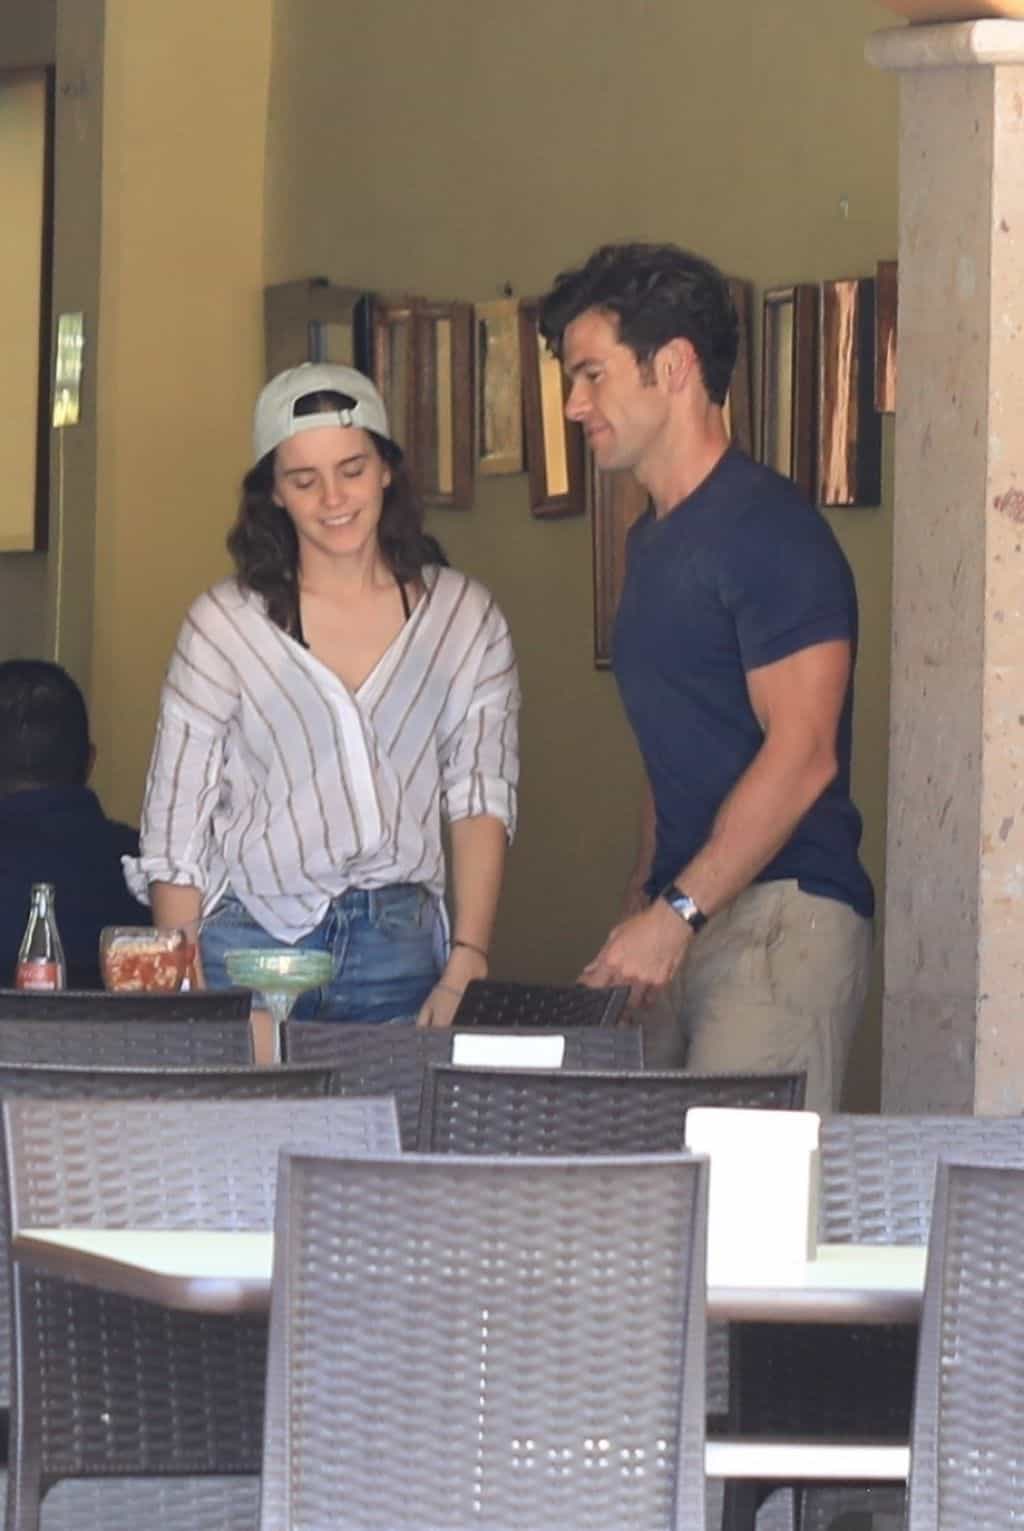 Emma Watson Looks Fantastic in Daisy Dukes During her Quiet Lunch in Mexico